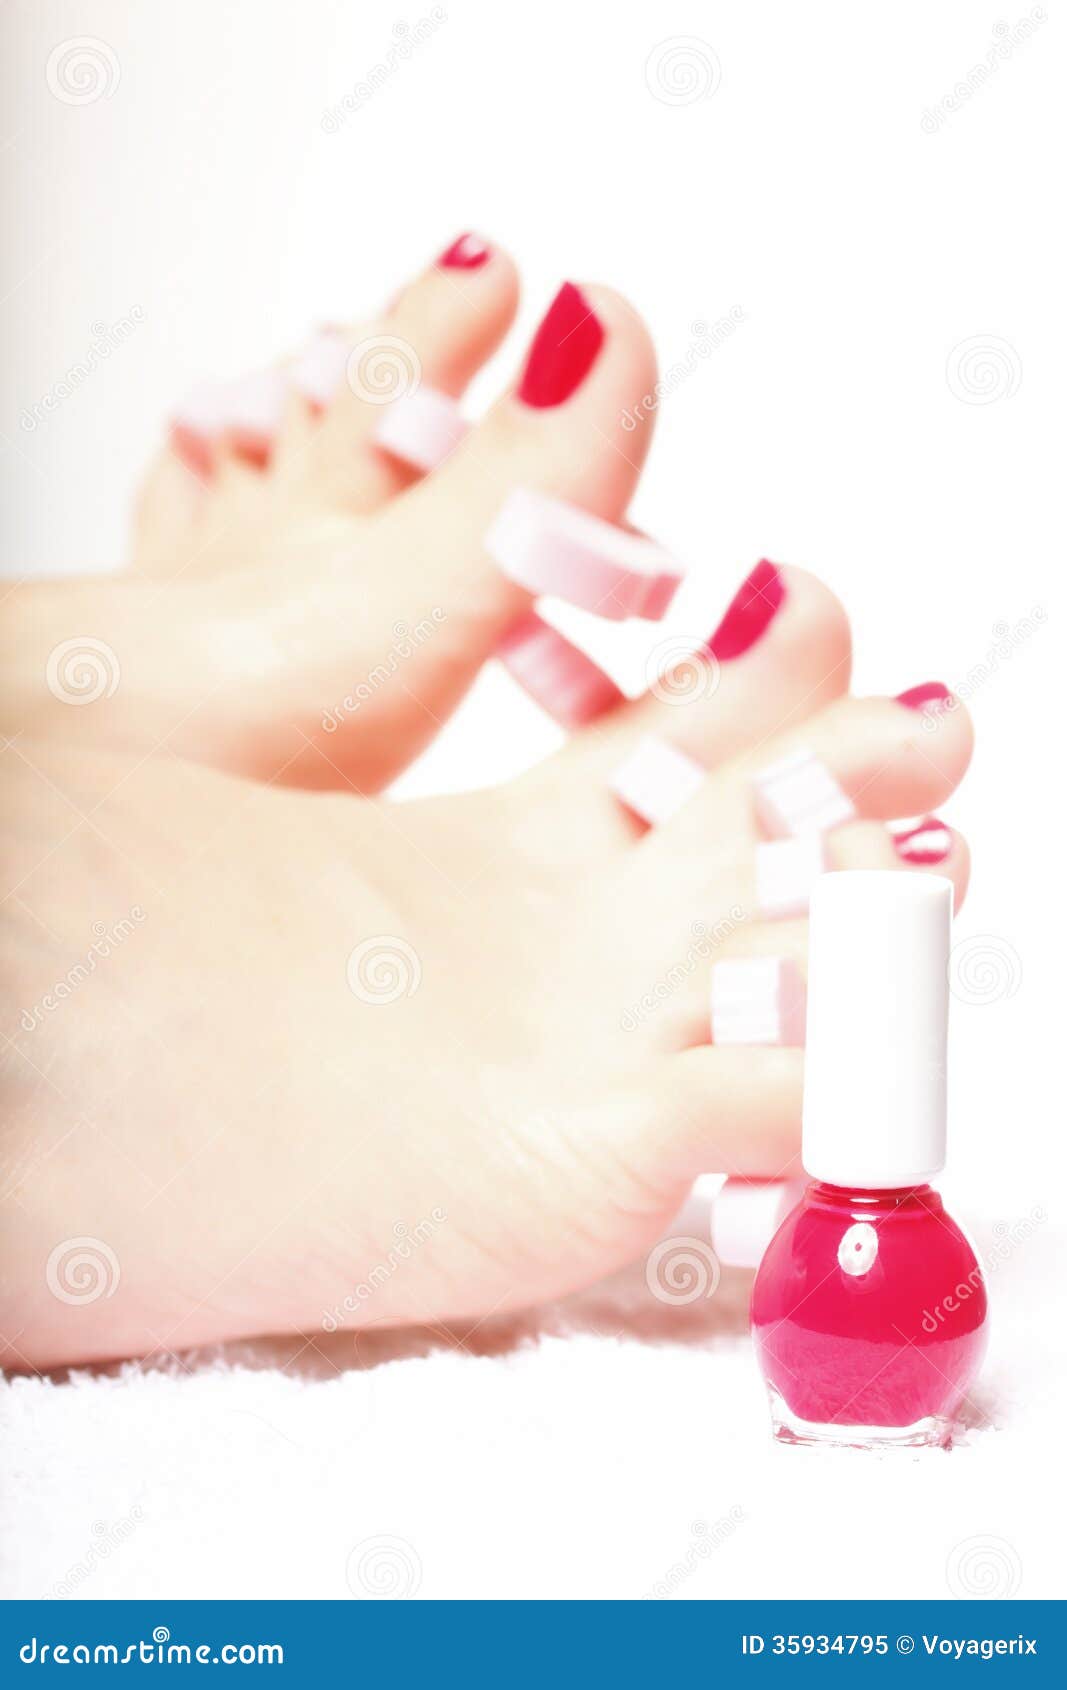 Foot Pedicure Applying Red Toenails on White Stock Image - Image of ...